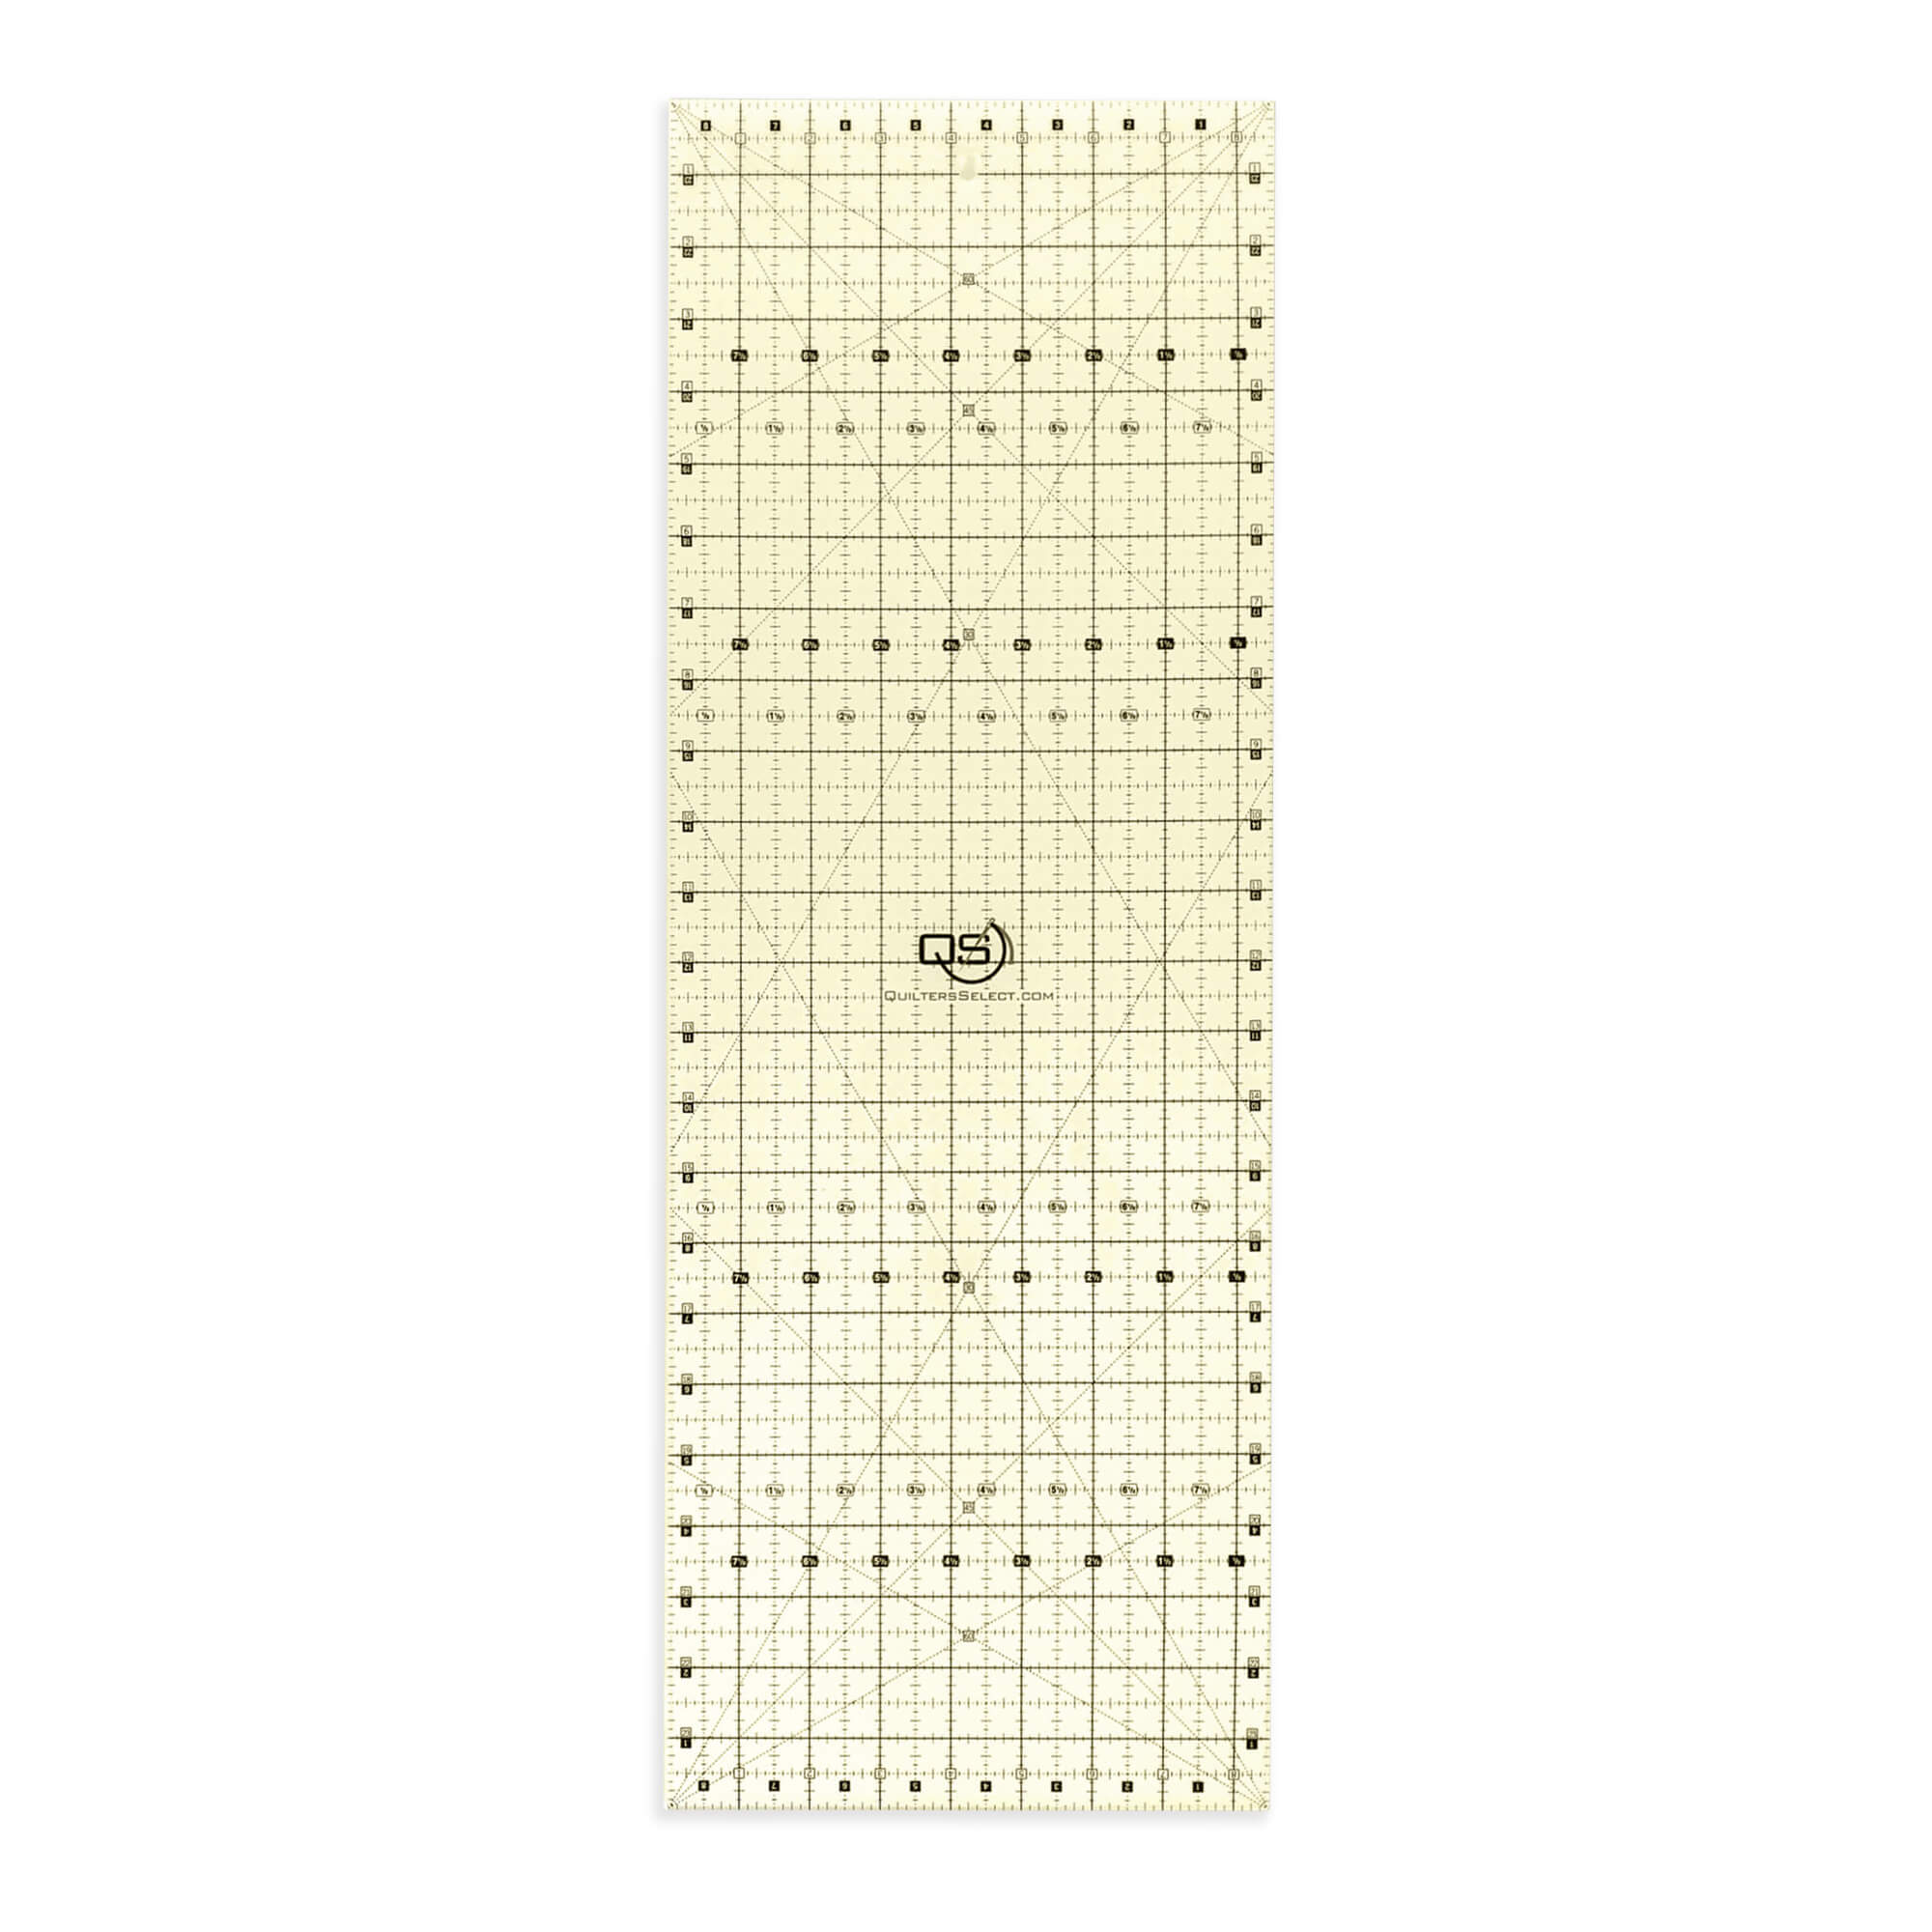 Quilters Select QS-RUL8.5X24 8.5 x 24 Non-Slip Deluxe Quilting Ruler at